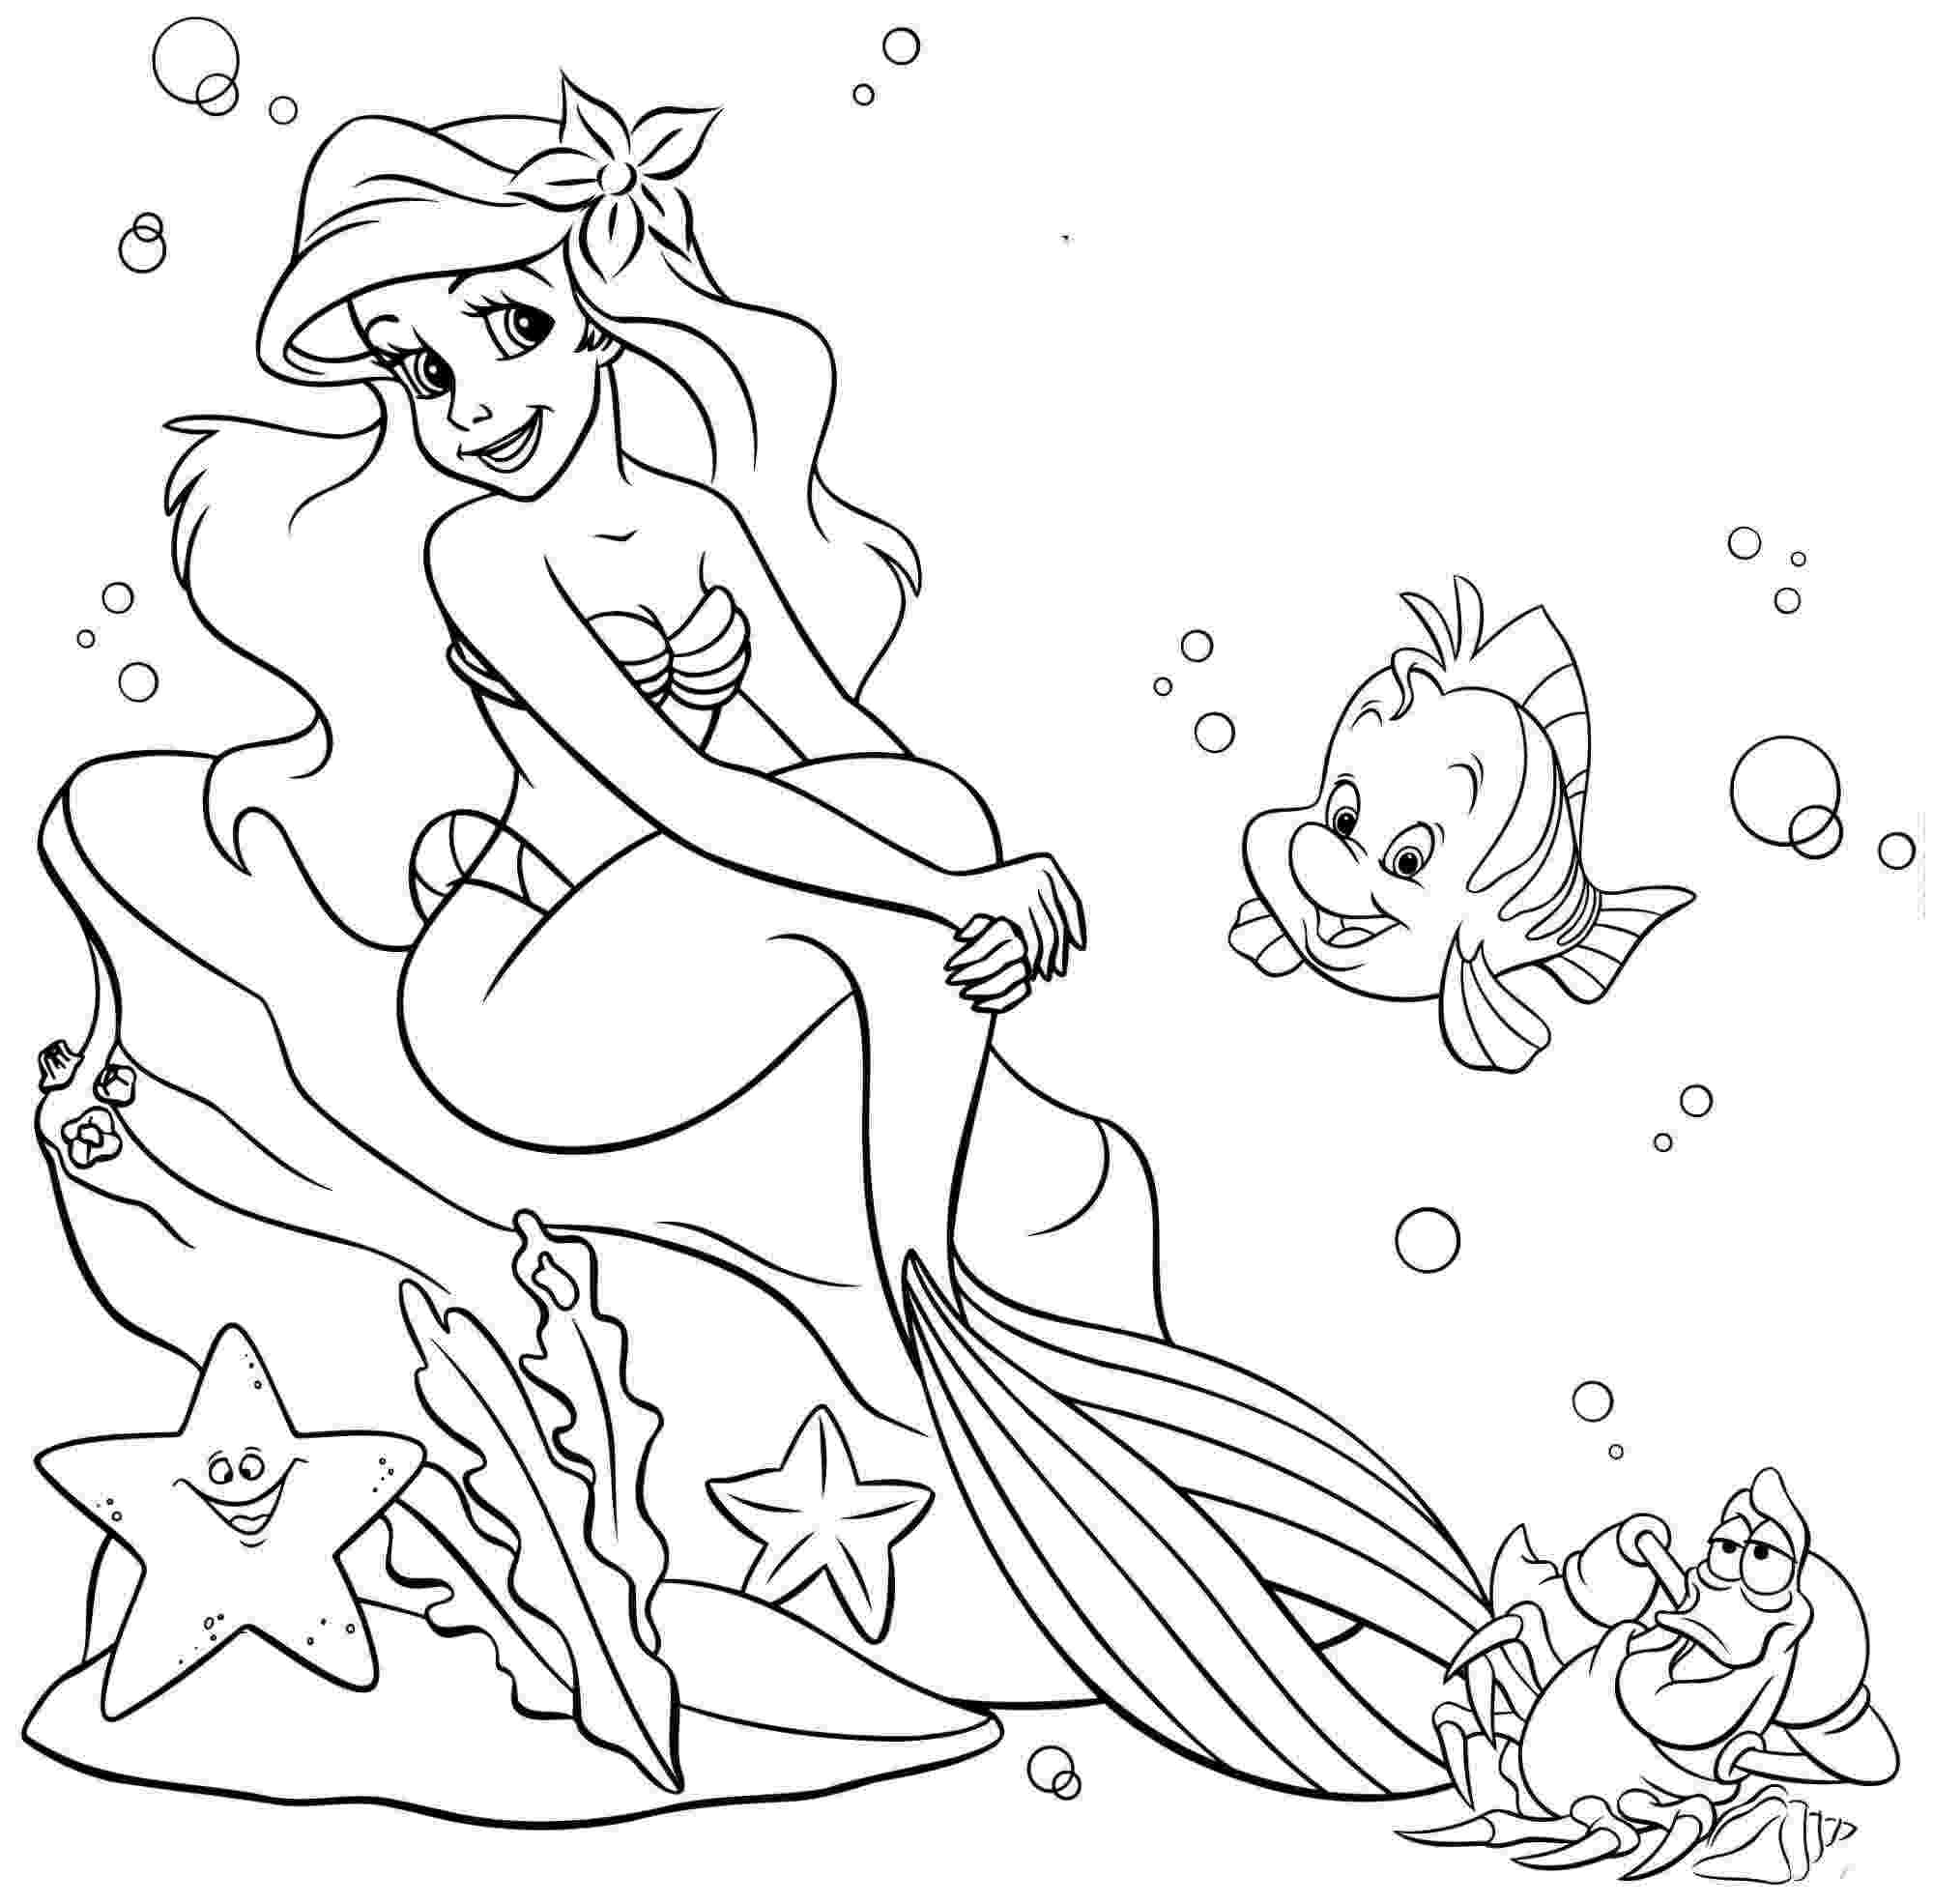 little mermaid color pages the little mermaid coloring pages to download and print little color mermaid pages 